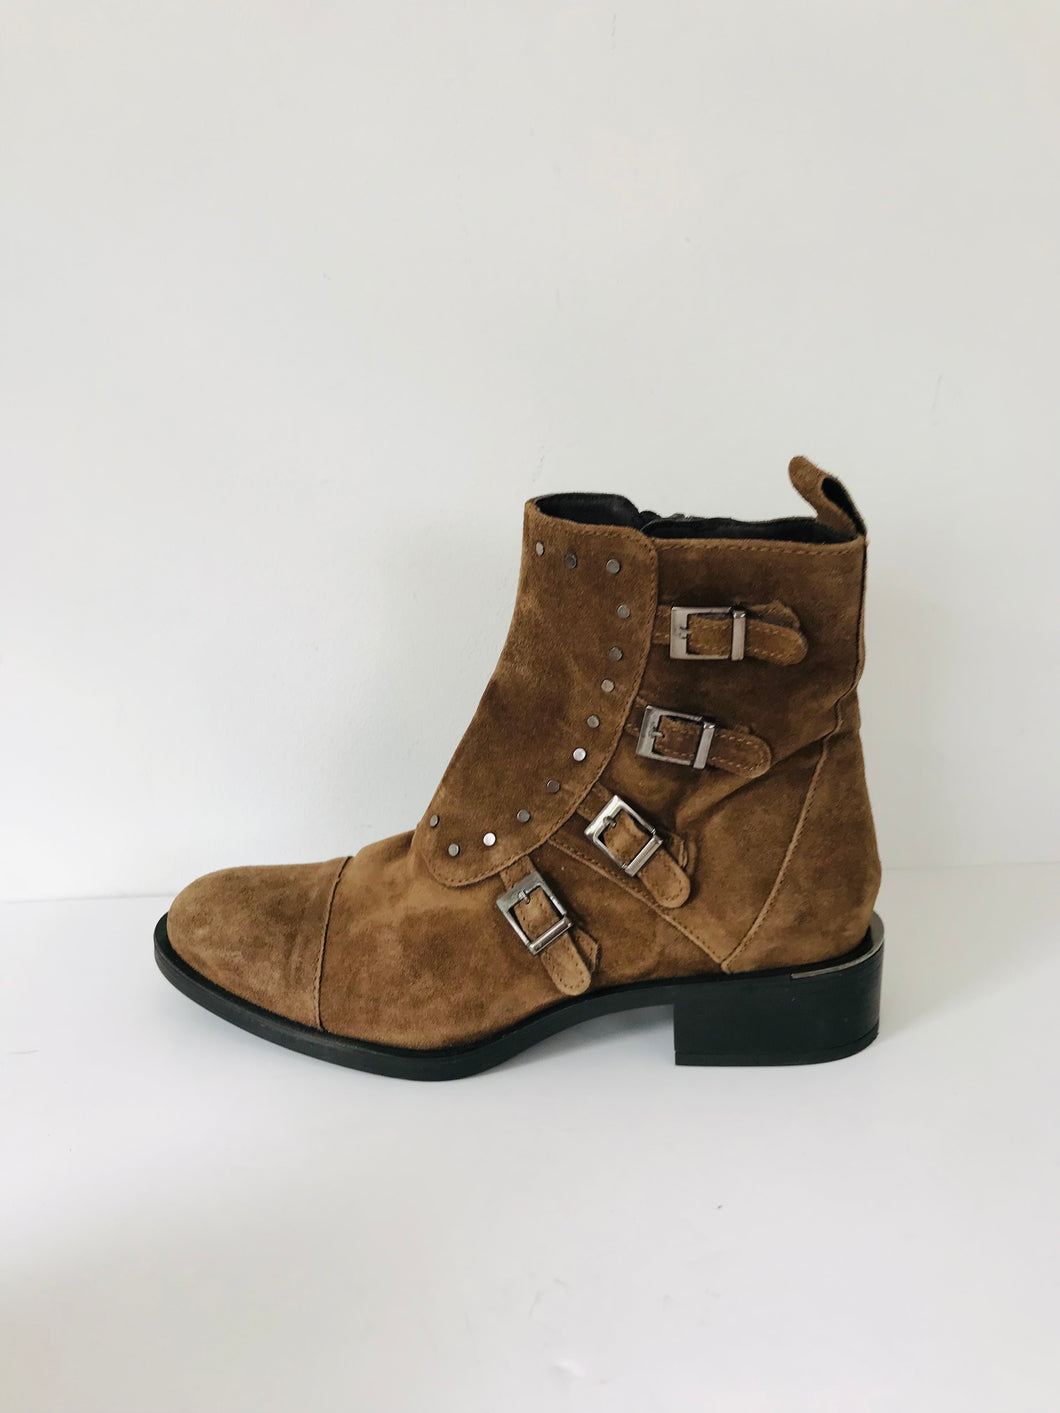 Alpe Woman Women's Suede Studded Boots | 40 UK7 | Brown